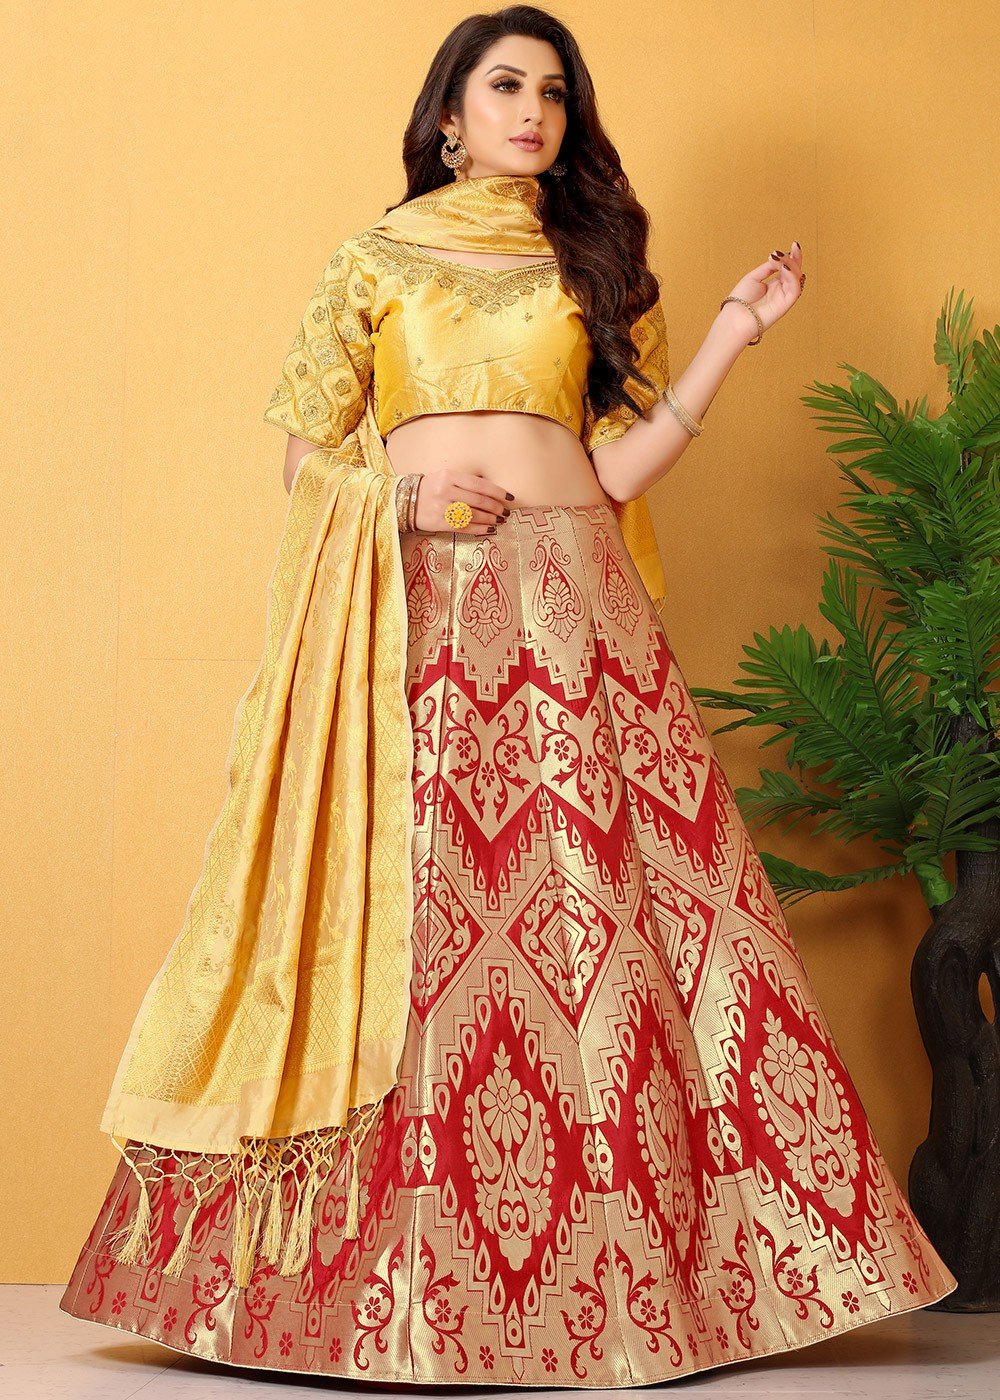 Shop Floral Lehengas: Estimated Time to Ship Within 7 Day